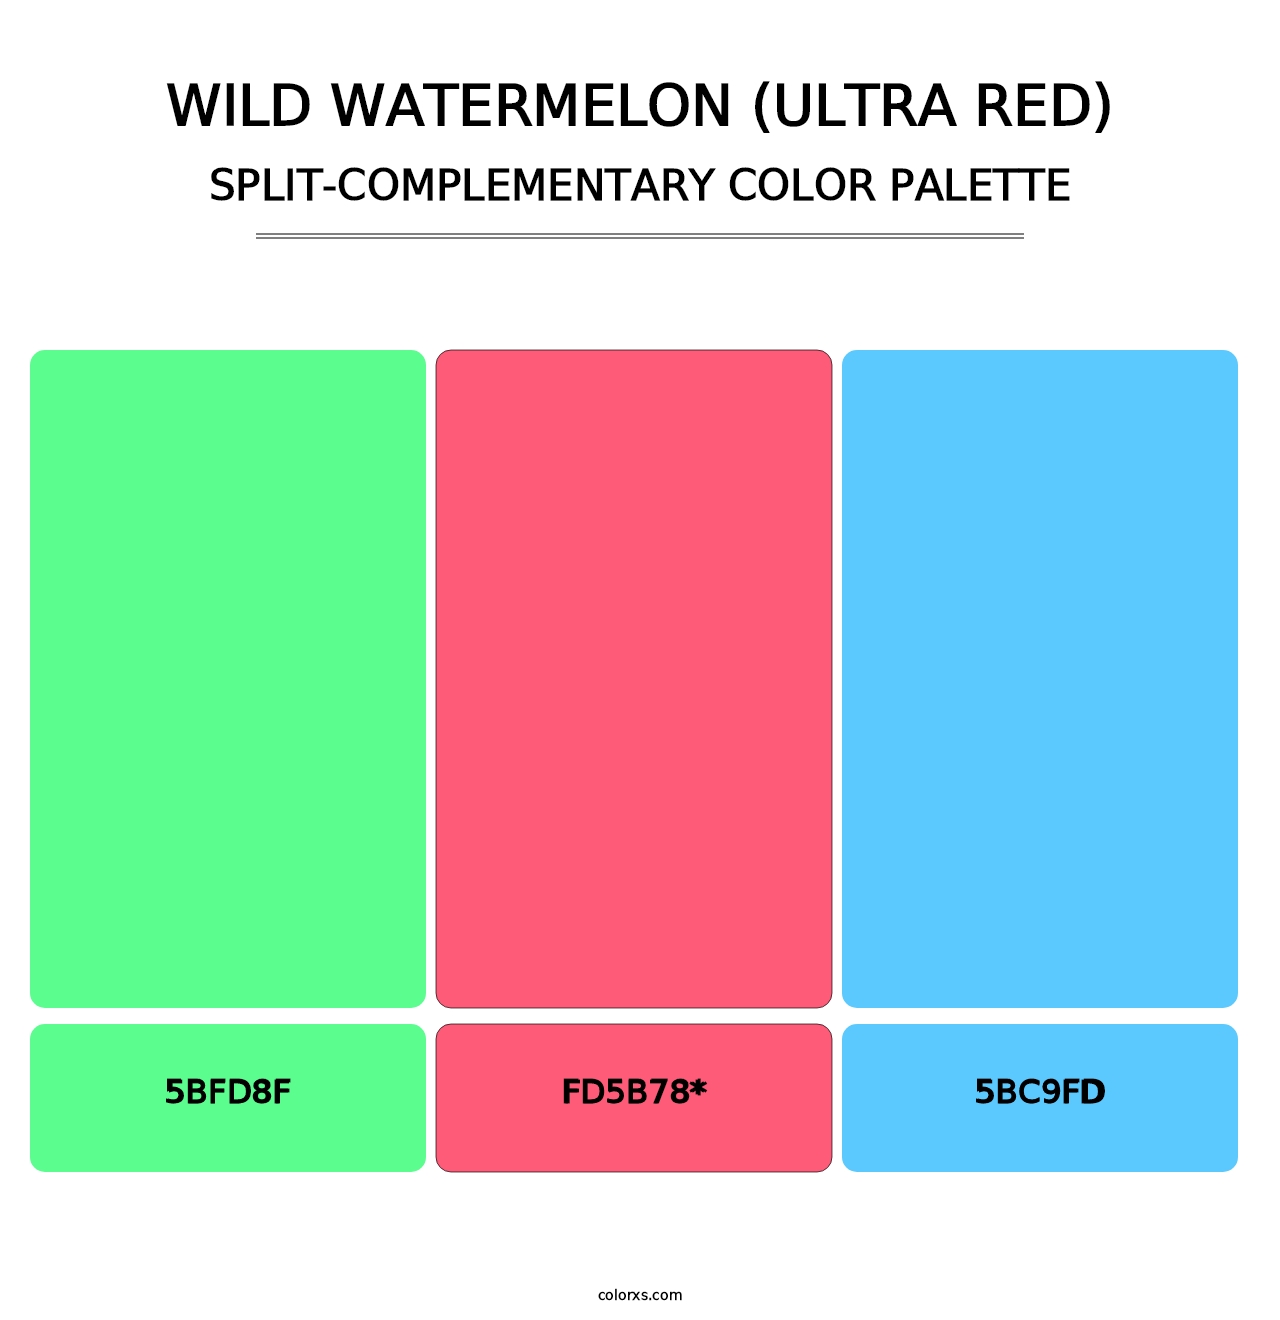 Wild Watermelon (Ultra Red) - Split-Complementary Color Palette